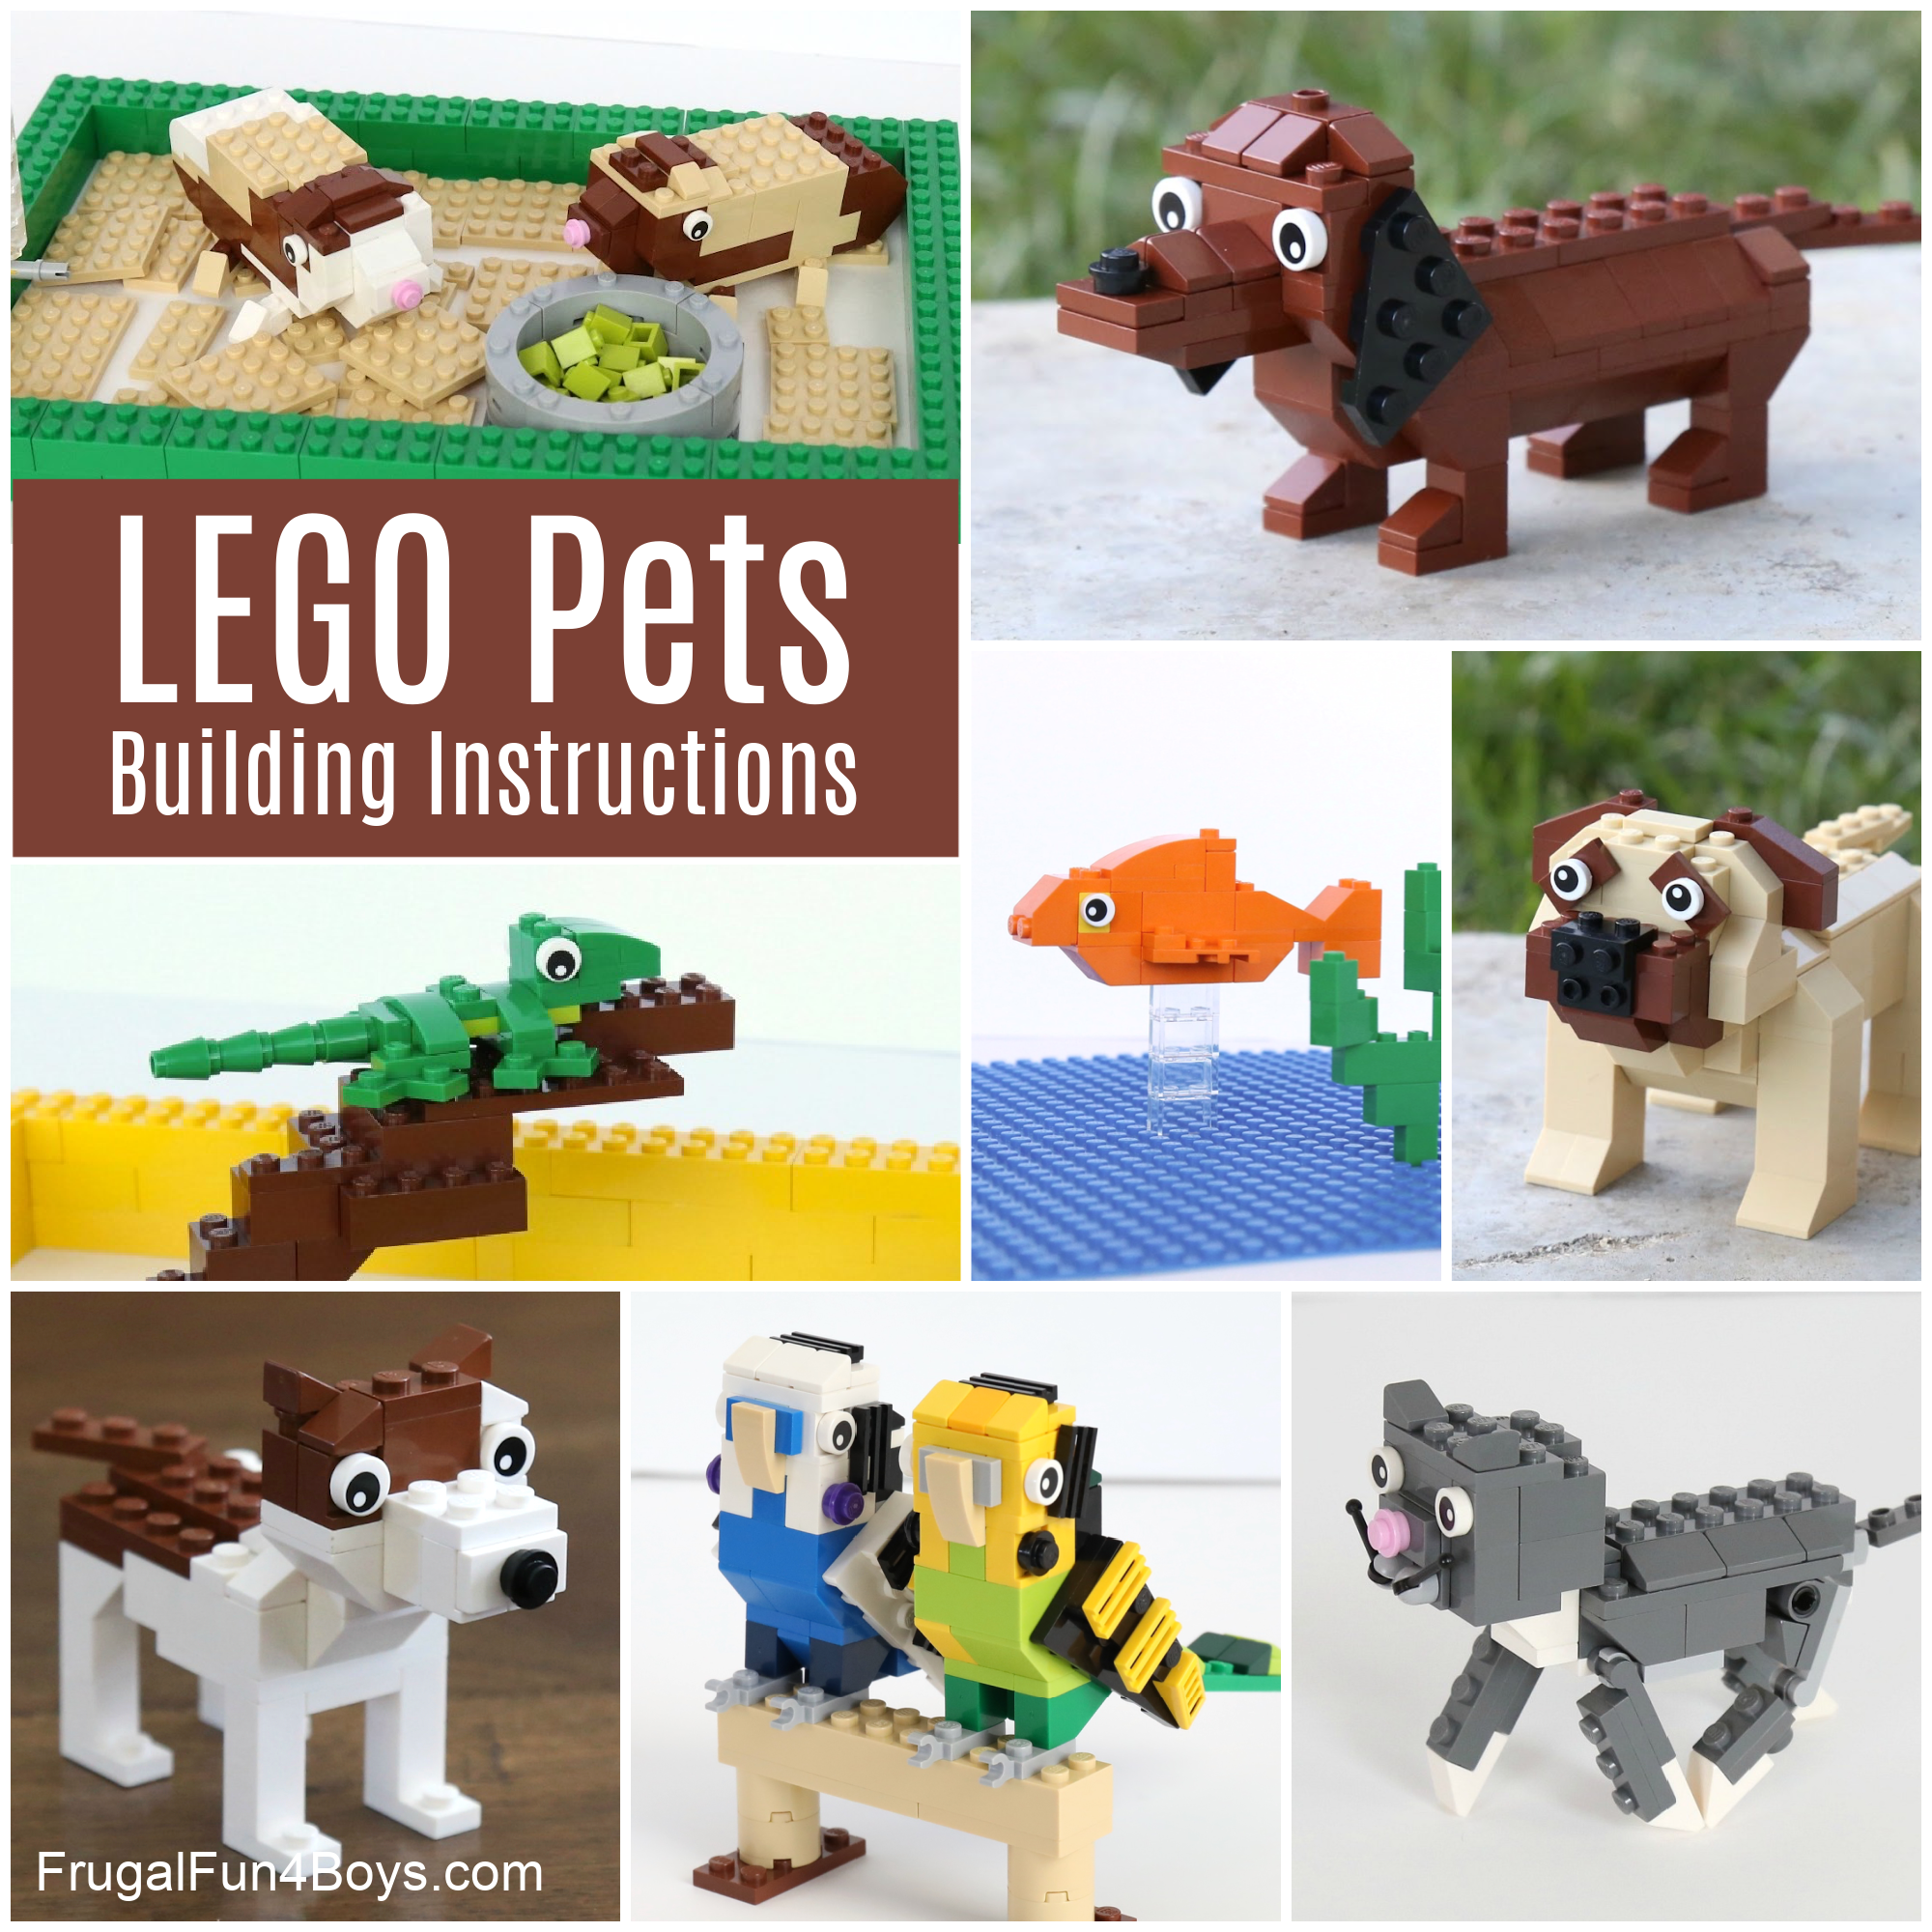 LEGO Pets! Building Instructions for Dogs, Cats, Guinea Pigs, and More! -  Frugal Fun For Boys and Girls